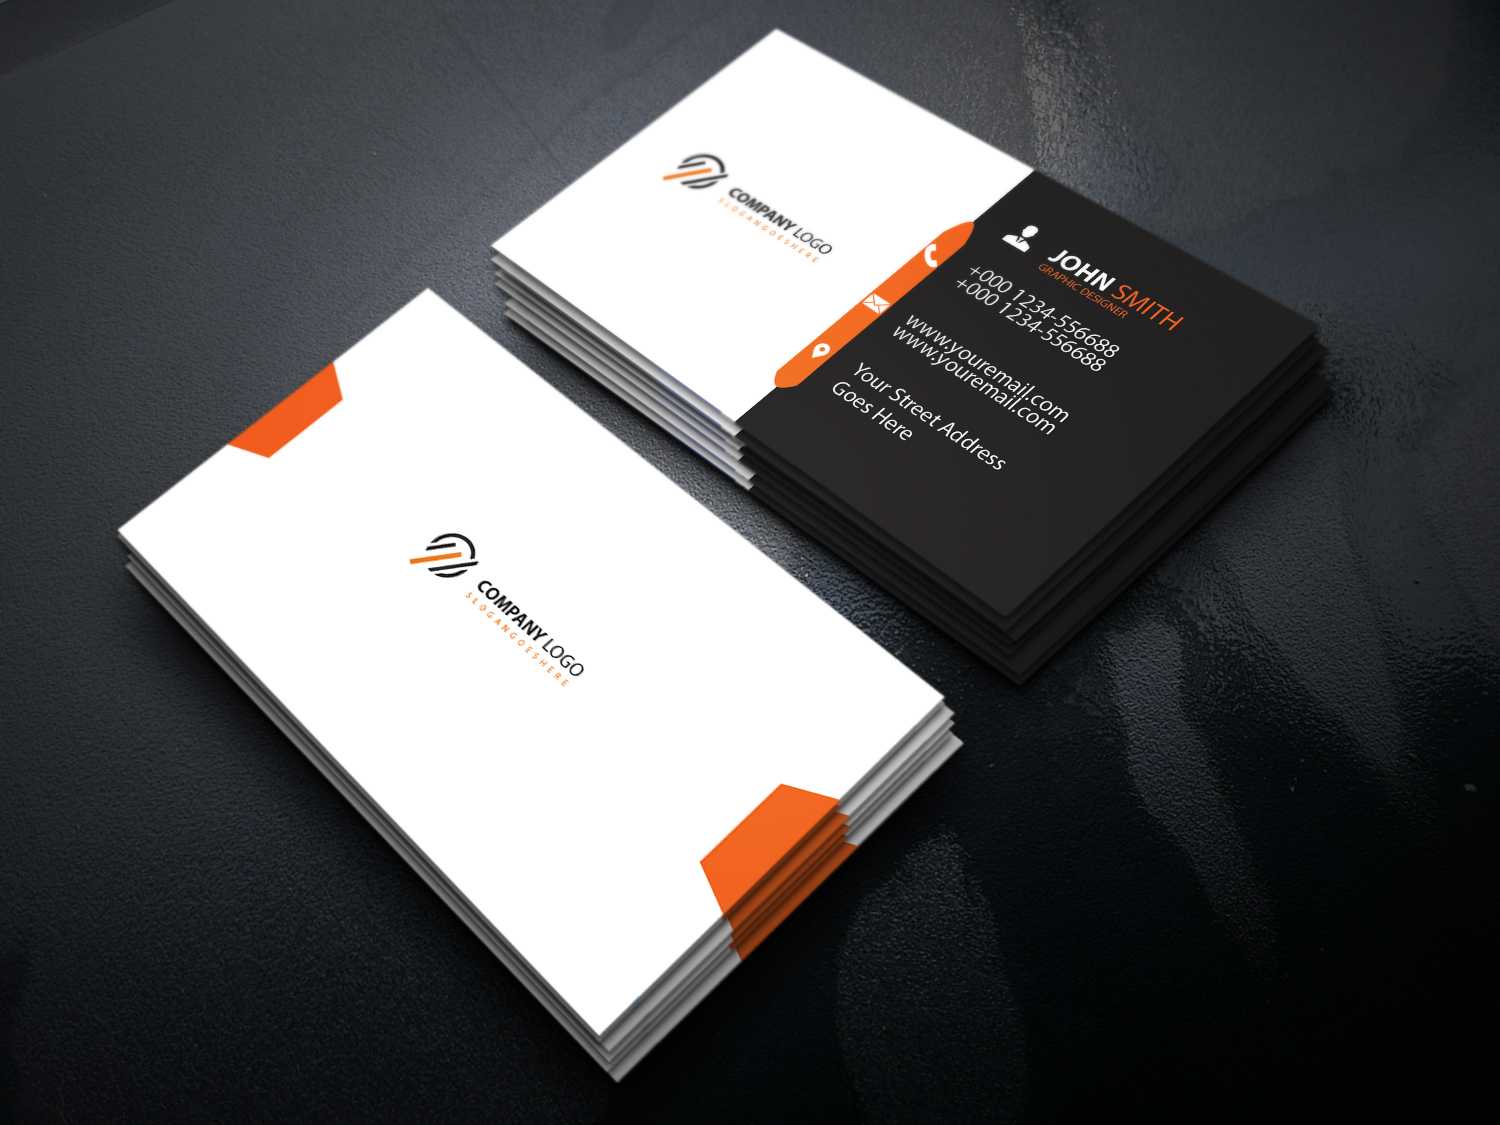 012 Template Ideas Businesscard 2Btemplate Free2Bdownload With Business Card Template Photoshop Cs6